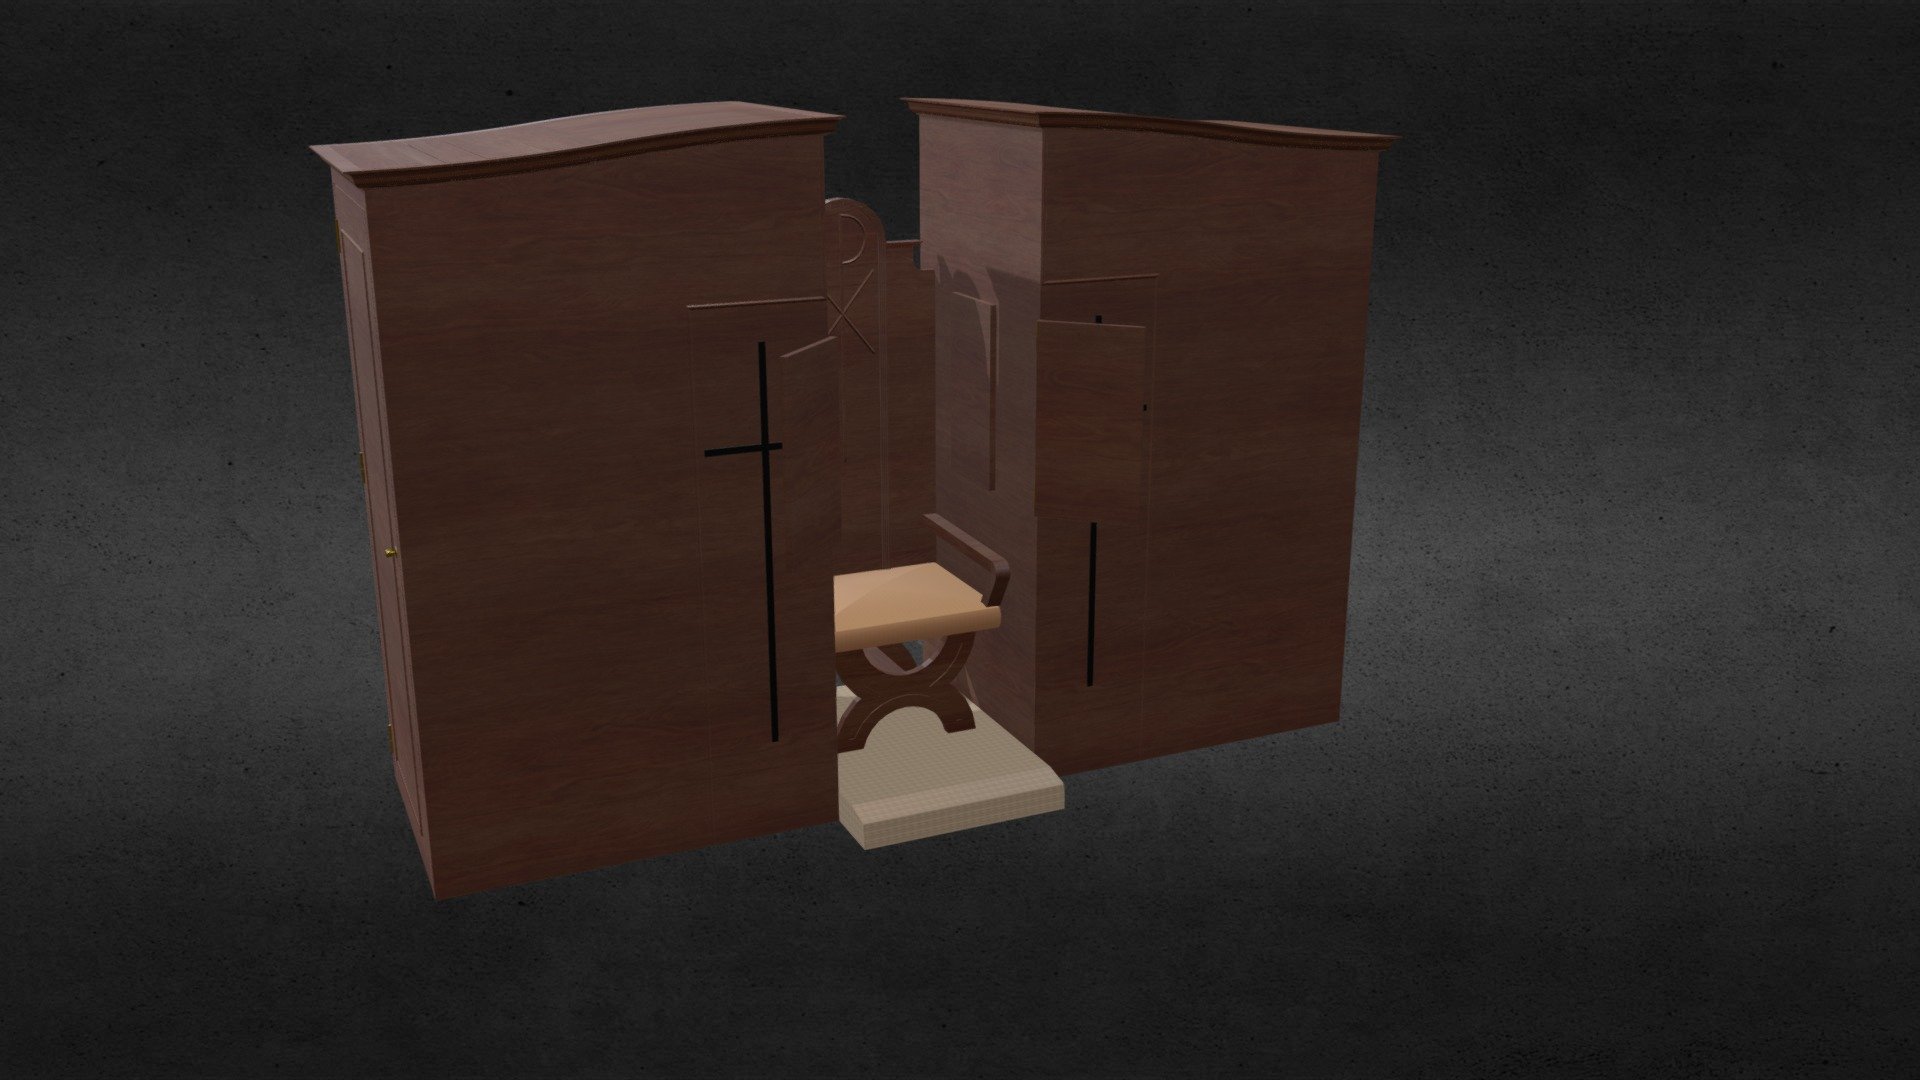 This is just a piece of church furniture that I modeled a while ago.
It is part of a whole series of furniture, decorative elements, even religious images framed in 3D and that I will be uploading soon 3d model